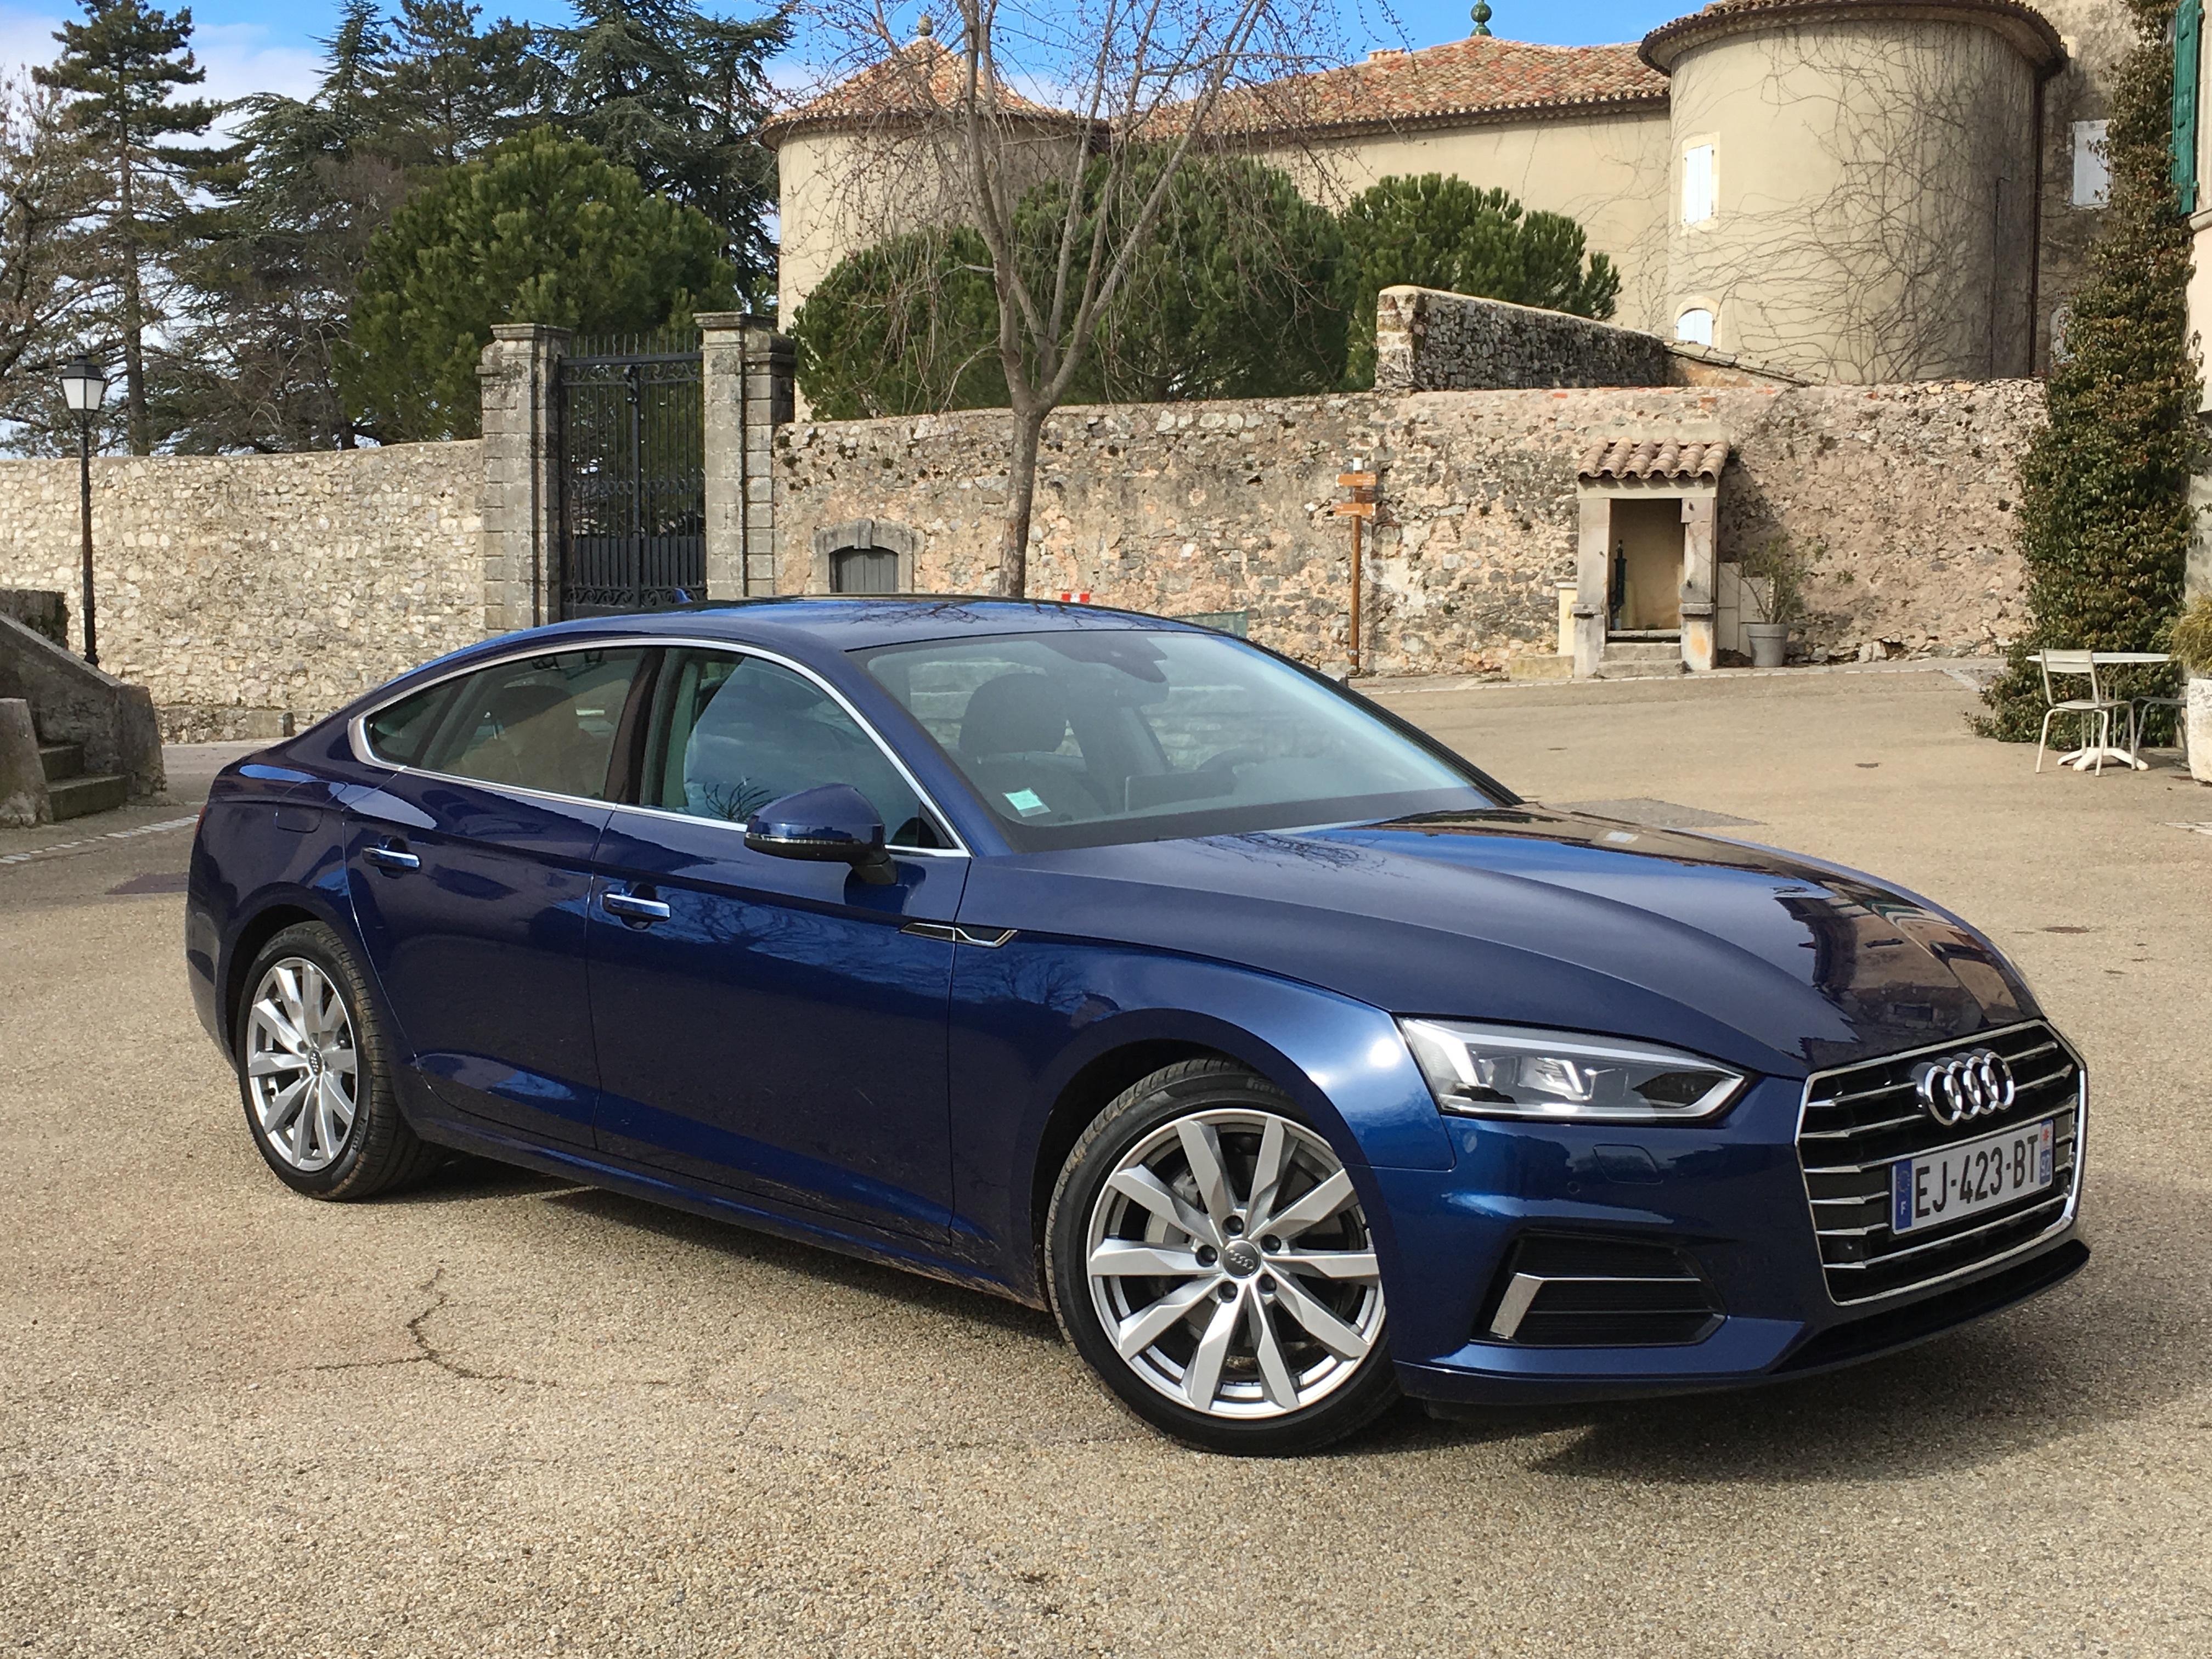 Audi A5 Sportback accessories specifications